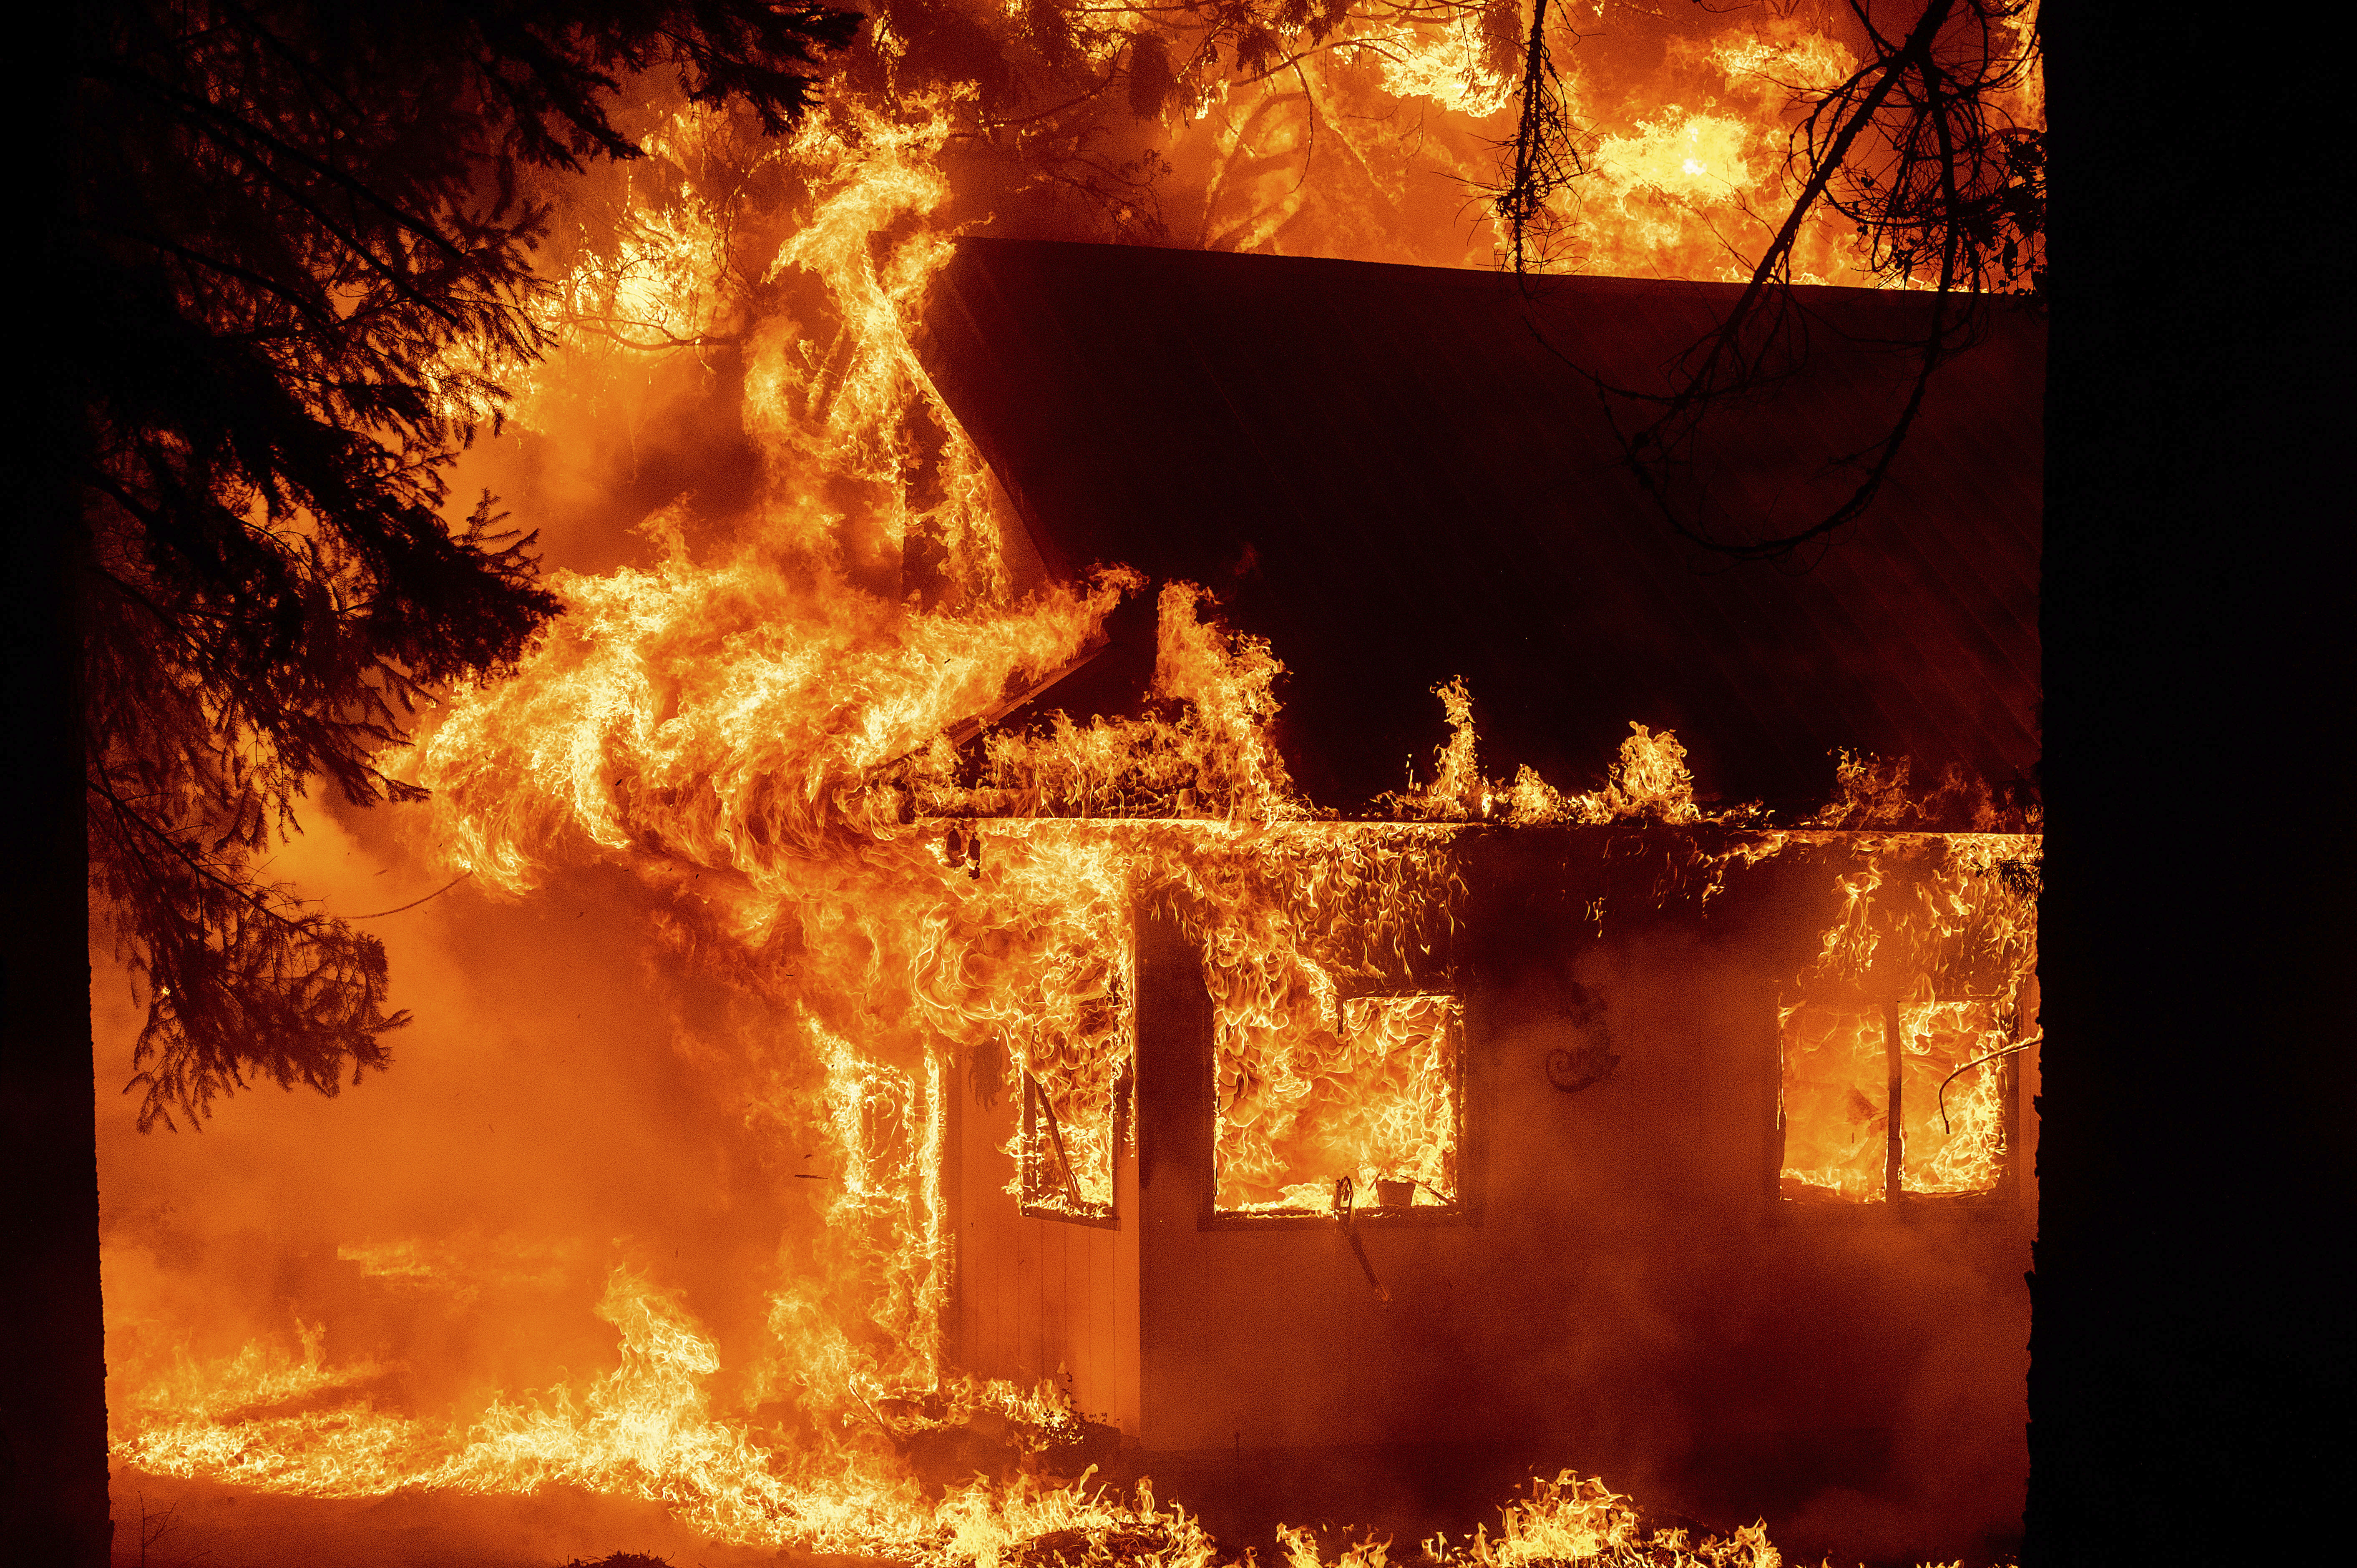 California's largest fire burns homes as blazes scorch West